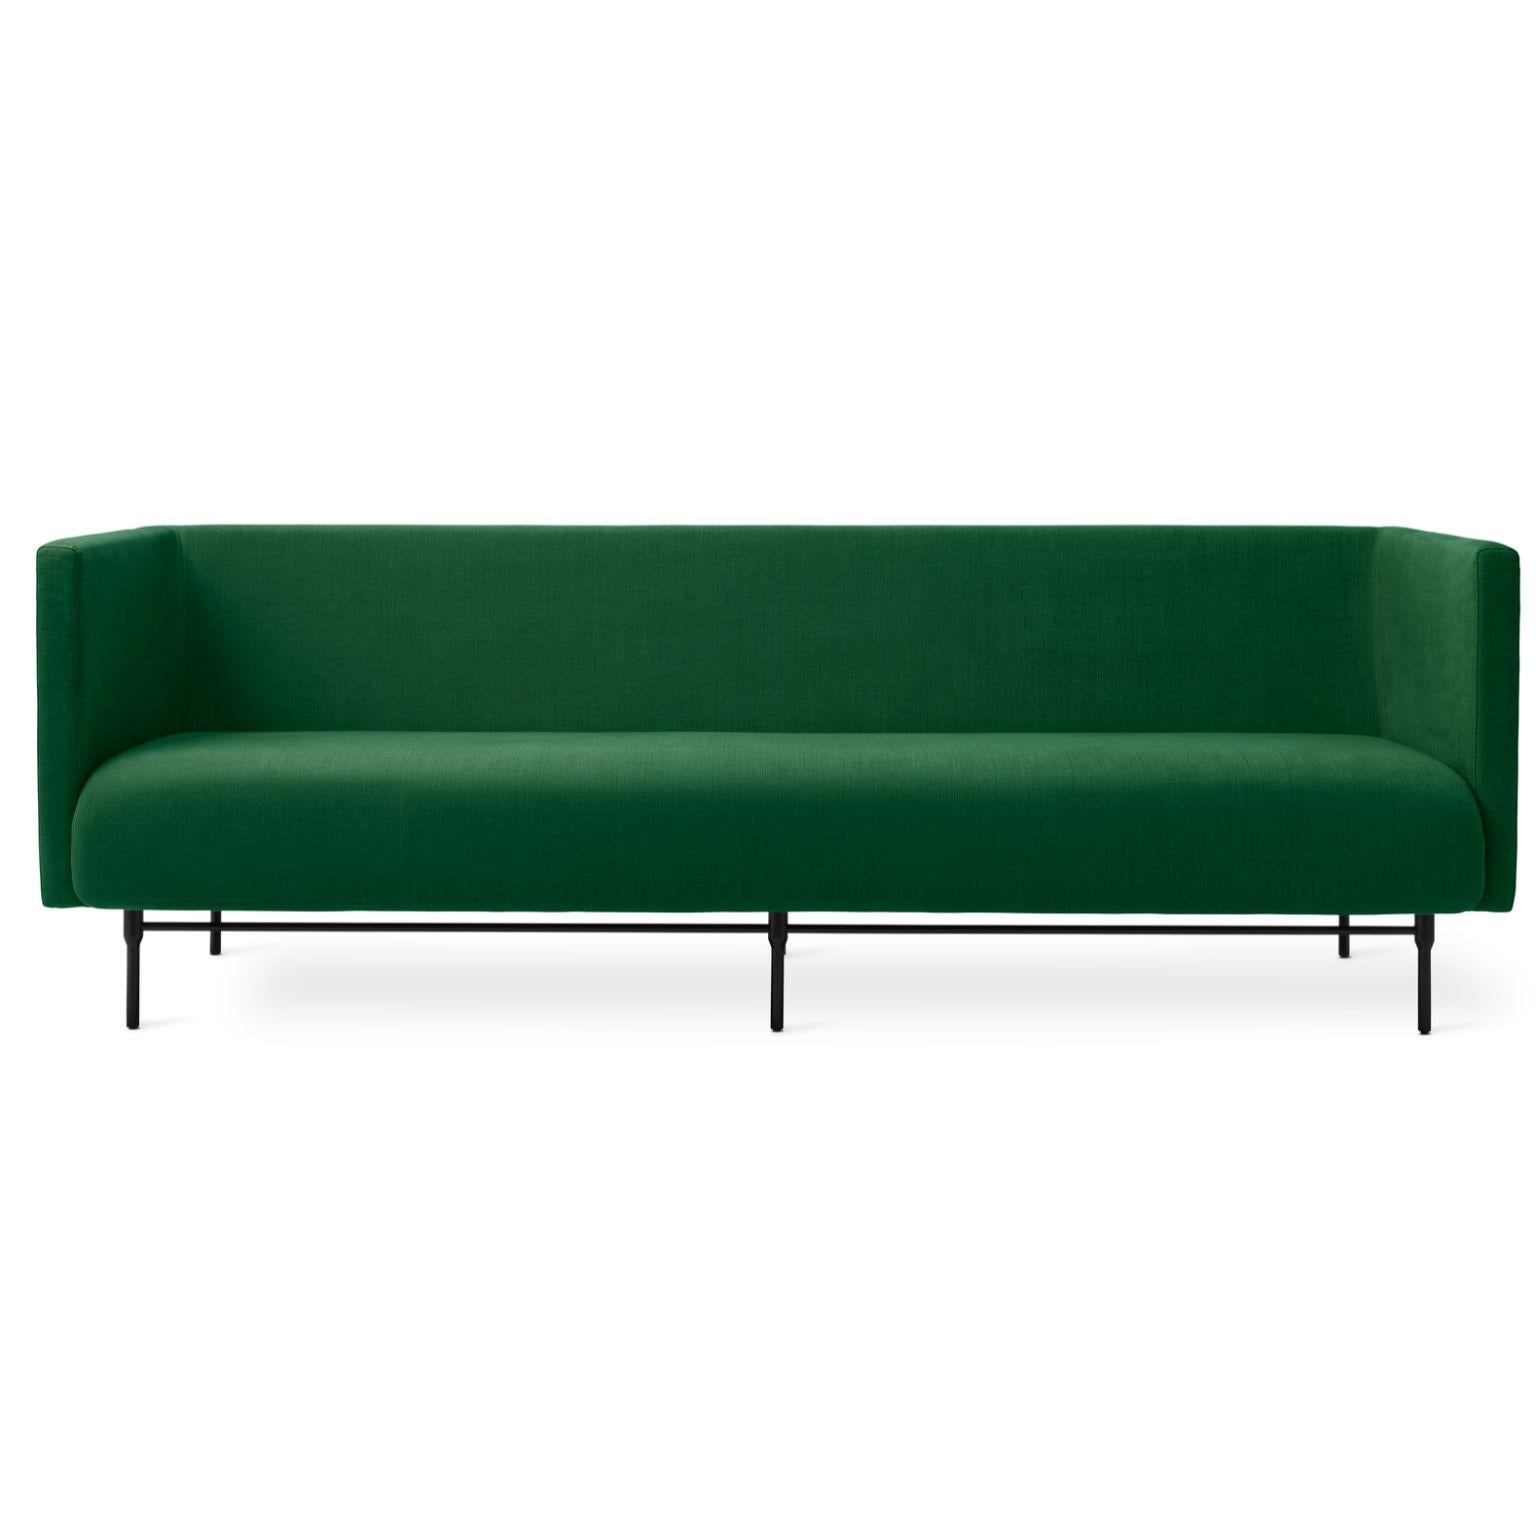 Galore 3 seater Emerald by Warm Nordic
Dimensions: D222 x W83 x H 76 cm
Material: Textile upholstery, Powder coated black steel legs, Wooden frame, foam, spring system.
Weight: 62 kg
Also available in different colours and finishes. 

Warm